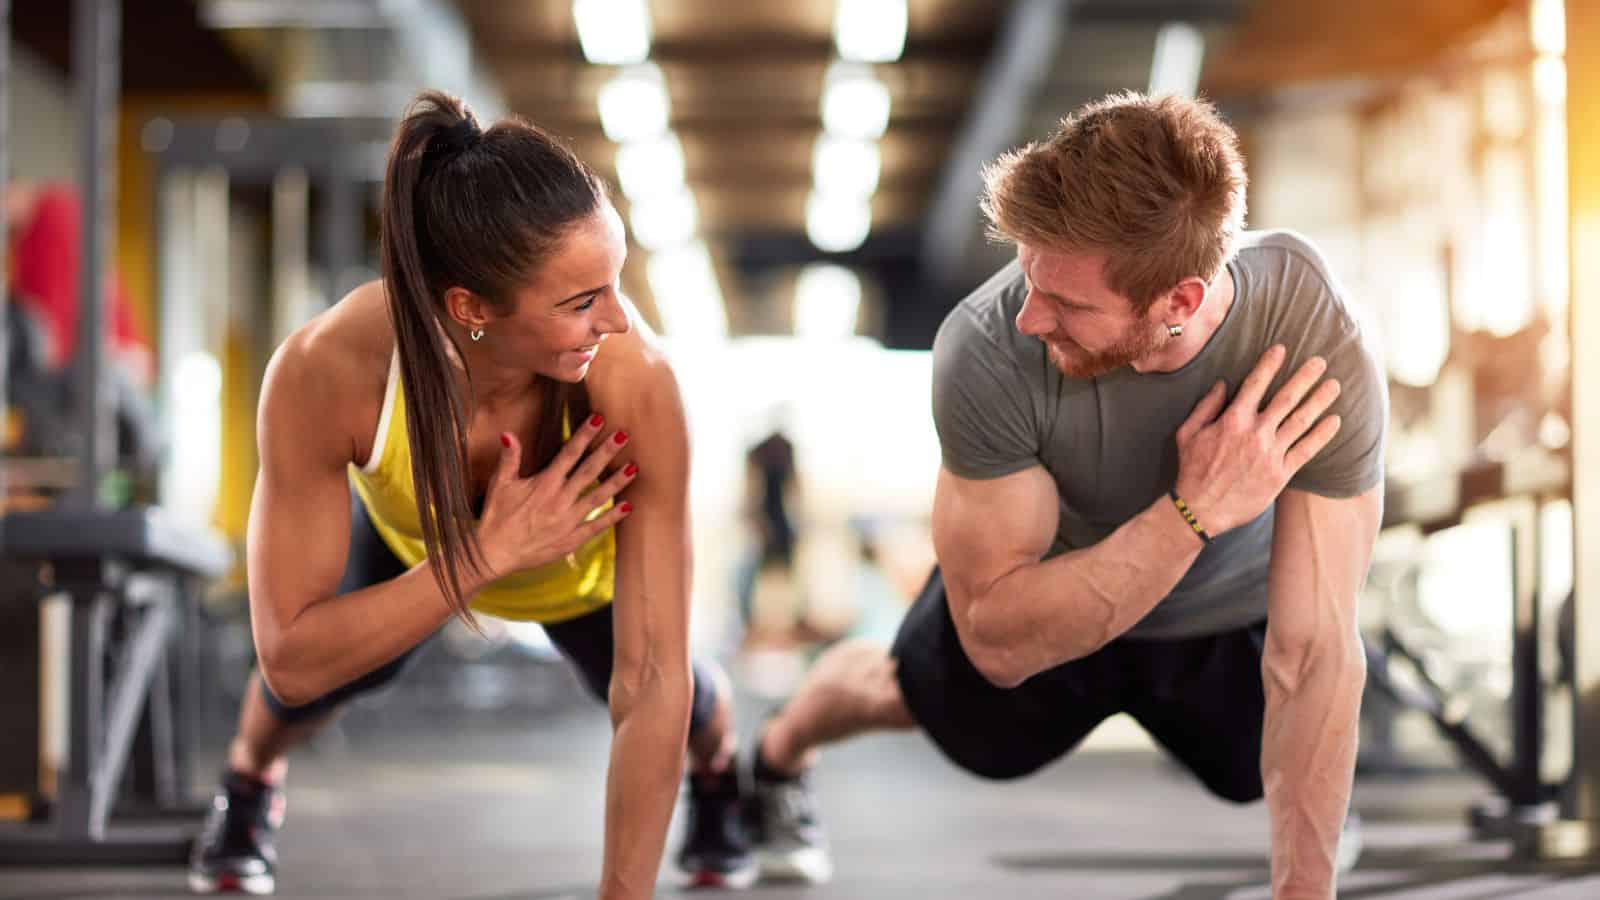 Gym – A Date Workout